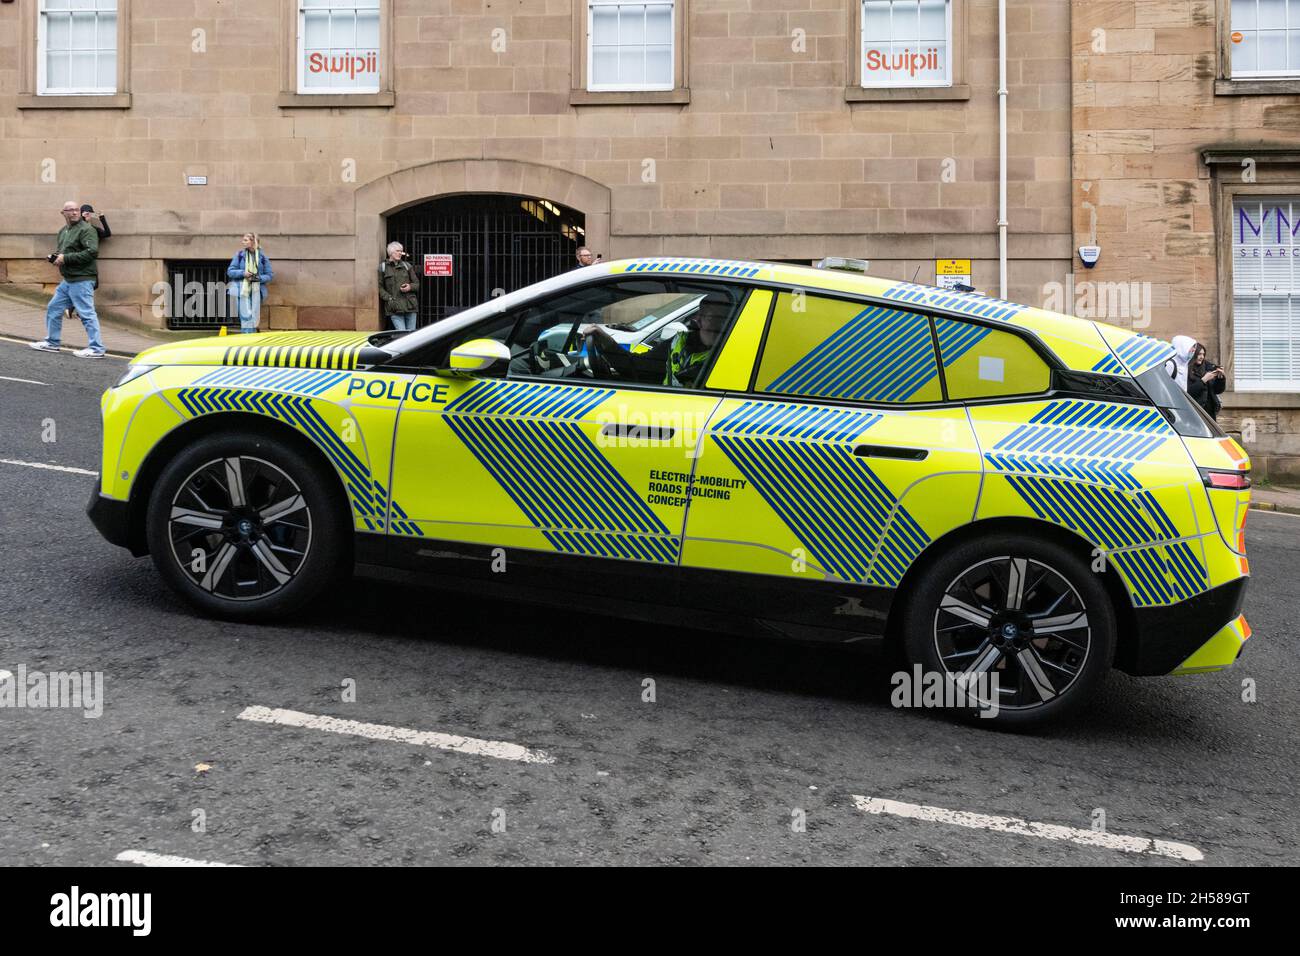 Electric-Mobility Roads Policing concept car in use at COP26 UN Climate Change Conference, Glasgow, Scotland, UK Stock Photo